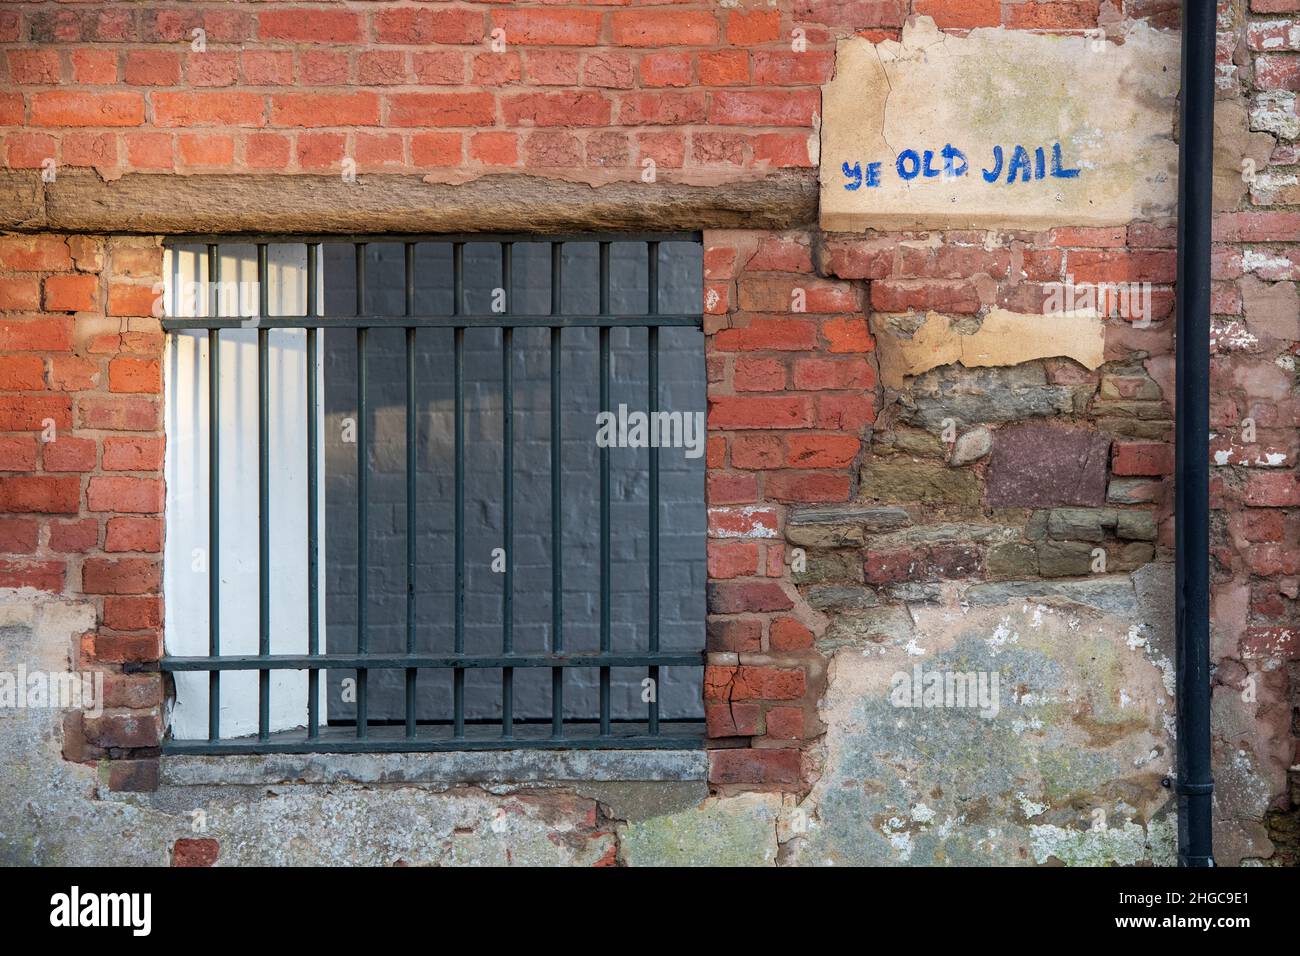 Ye old jail graffiti next to a barred window in the side of an old brick wall. Castle square, Ludlow, Shropshire, England Stock Photo